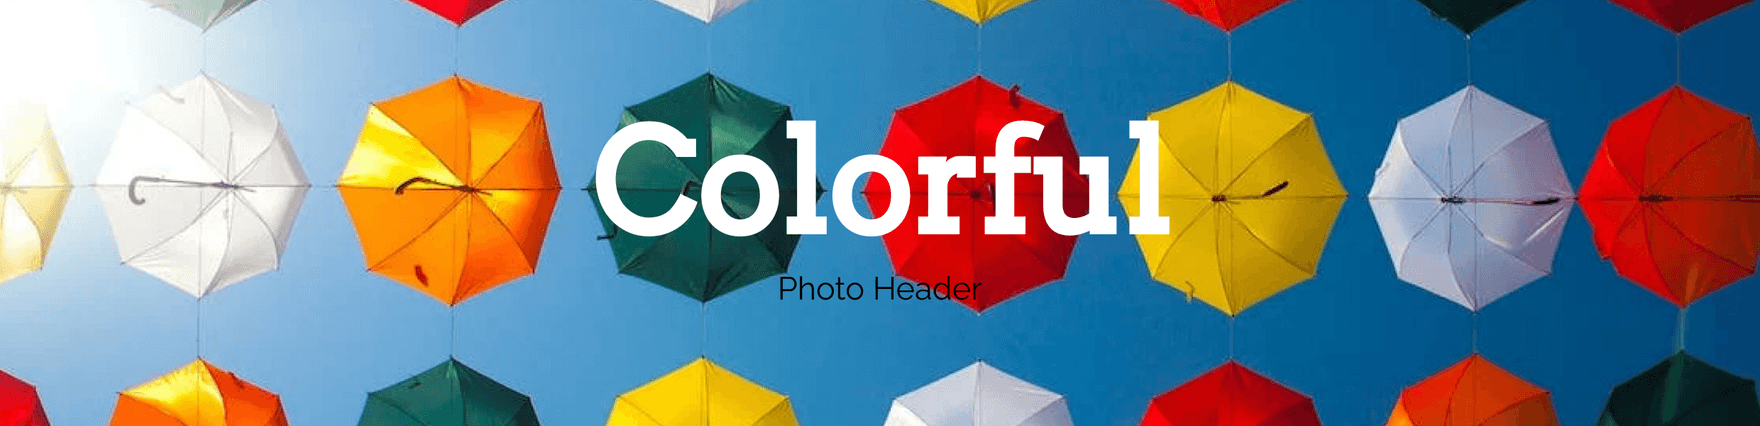 Colorful Photo Header